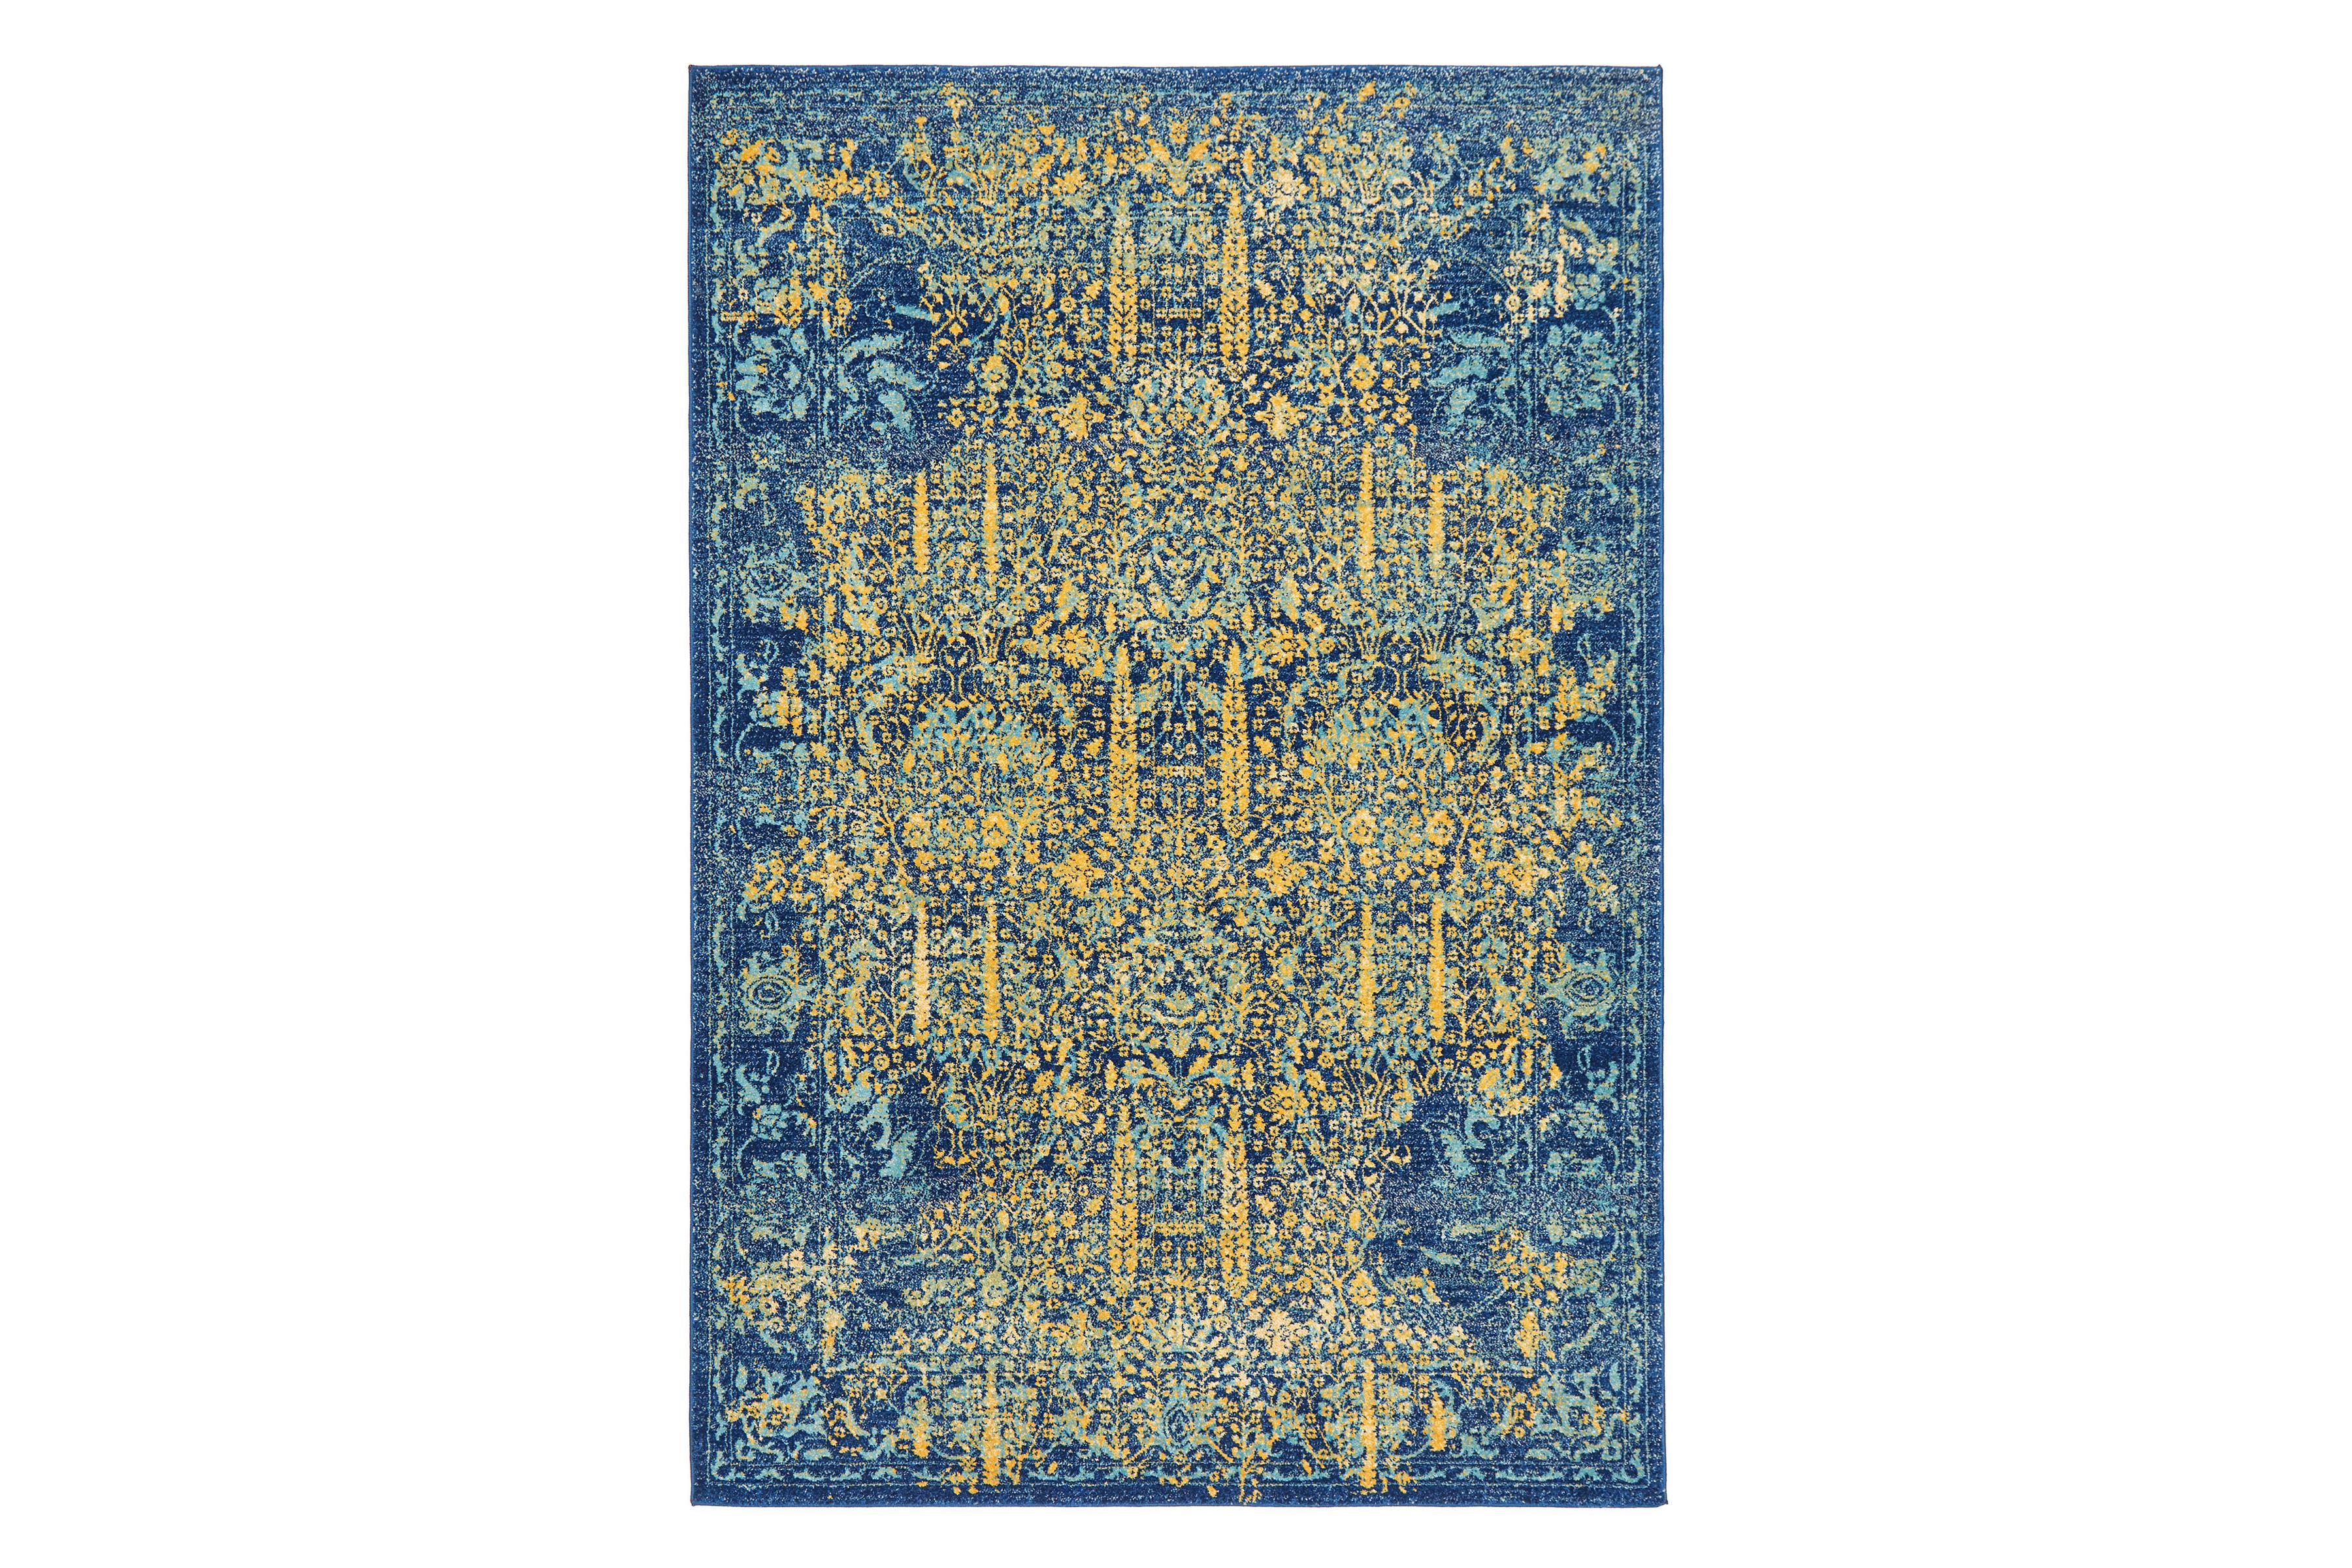 Rug Culture Rug Culture XL Royal Blue & Yellow Vintage Look Overdyed Rug - 330 x 240cm